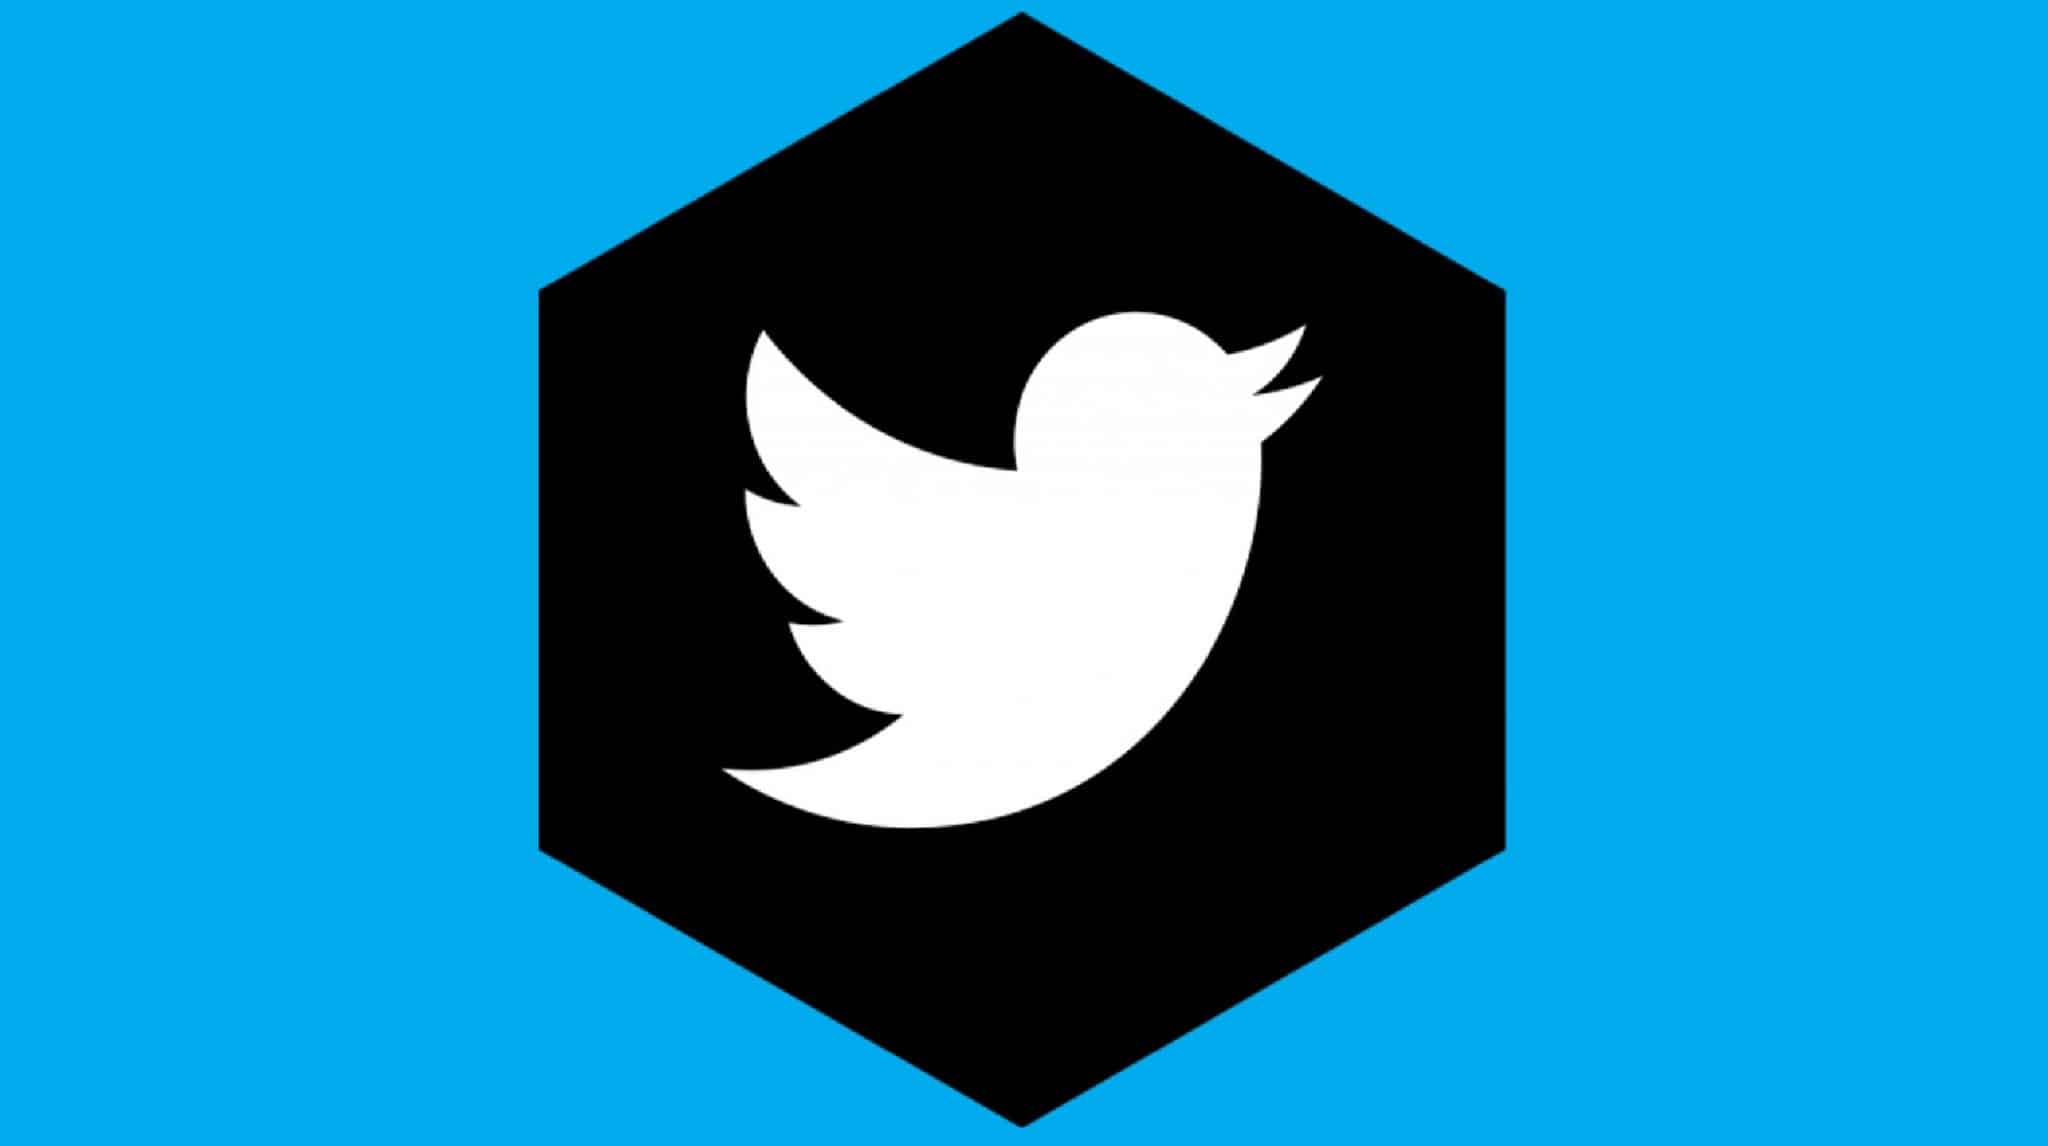 Twitter Hexagon profile picture